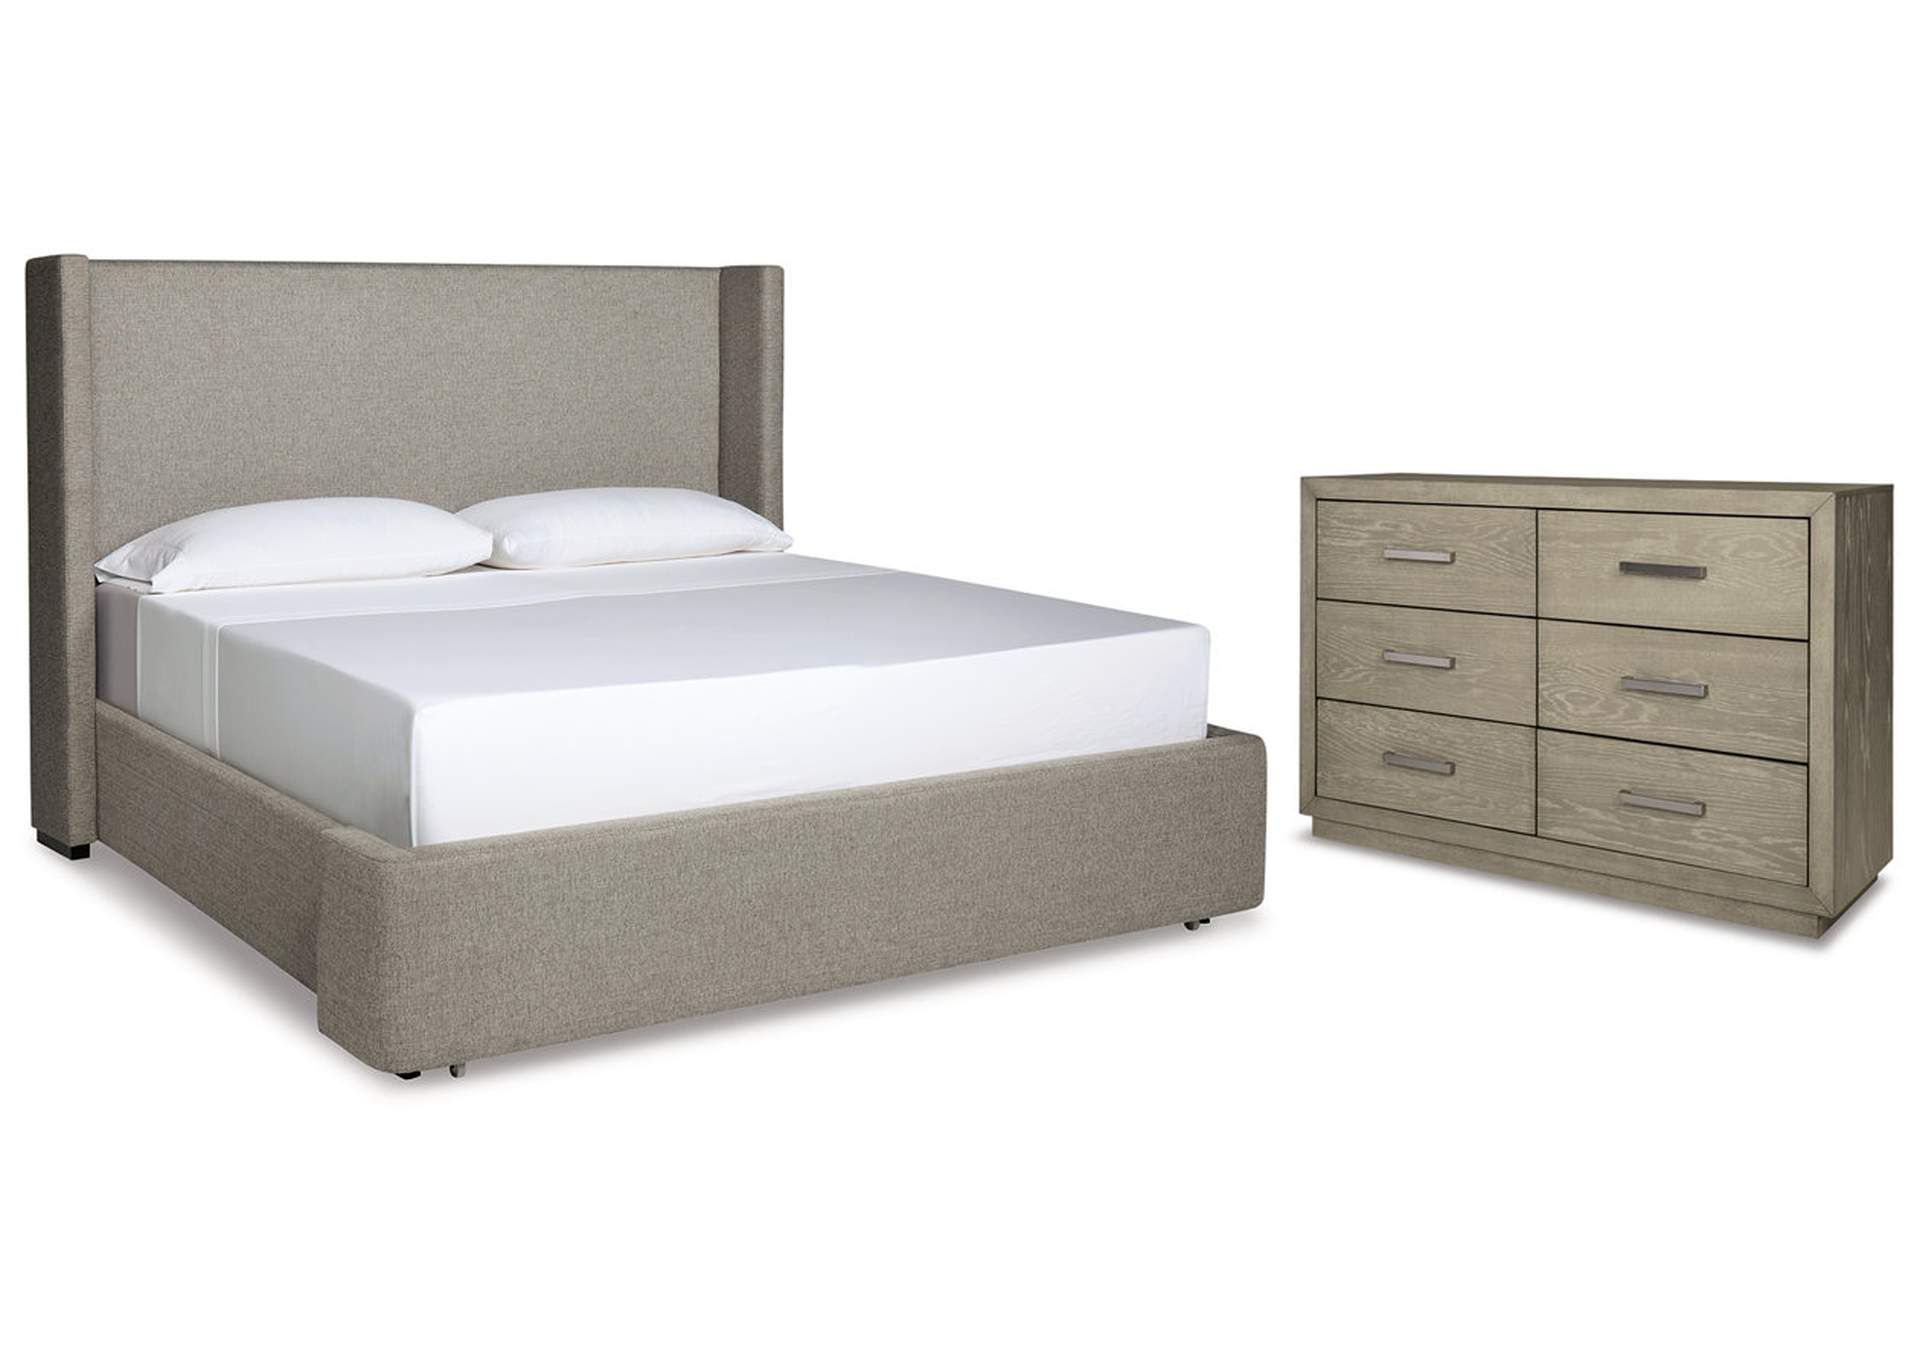 Fawnburg Queen Upholstered Bed with Storage with Dresser,Millennium